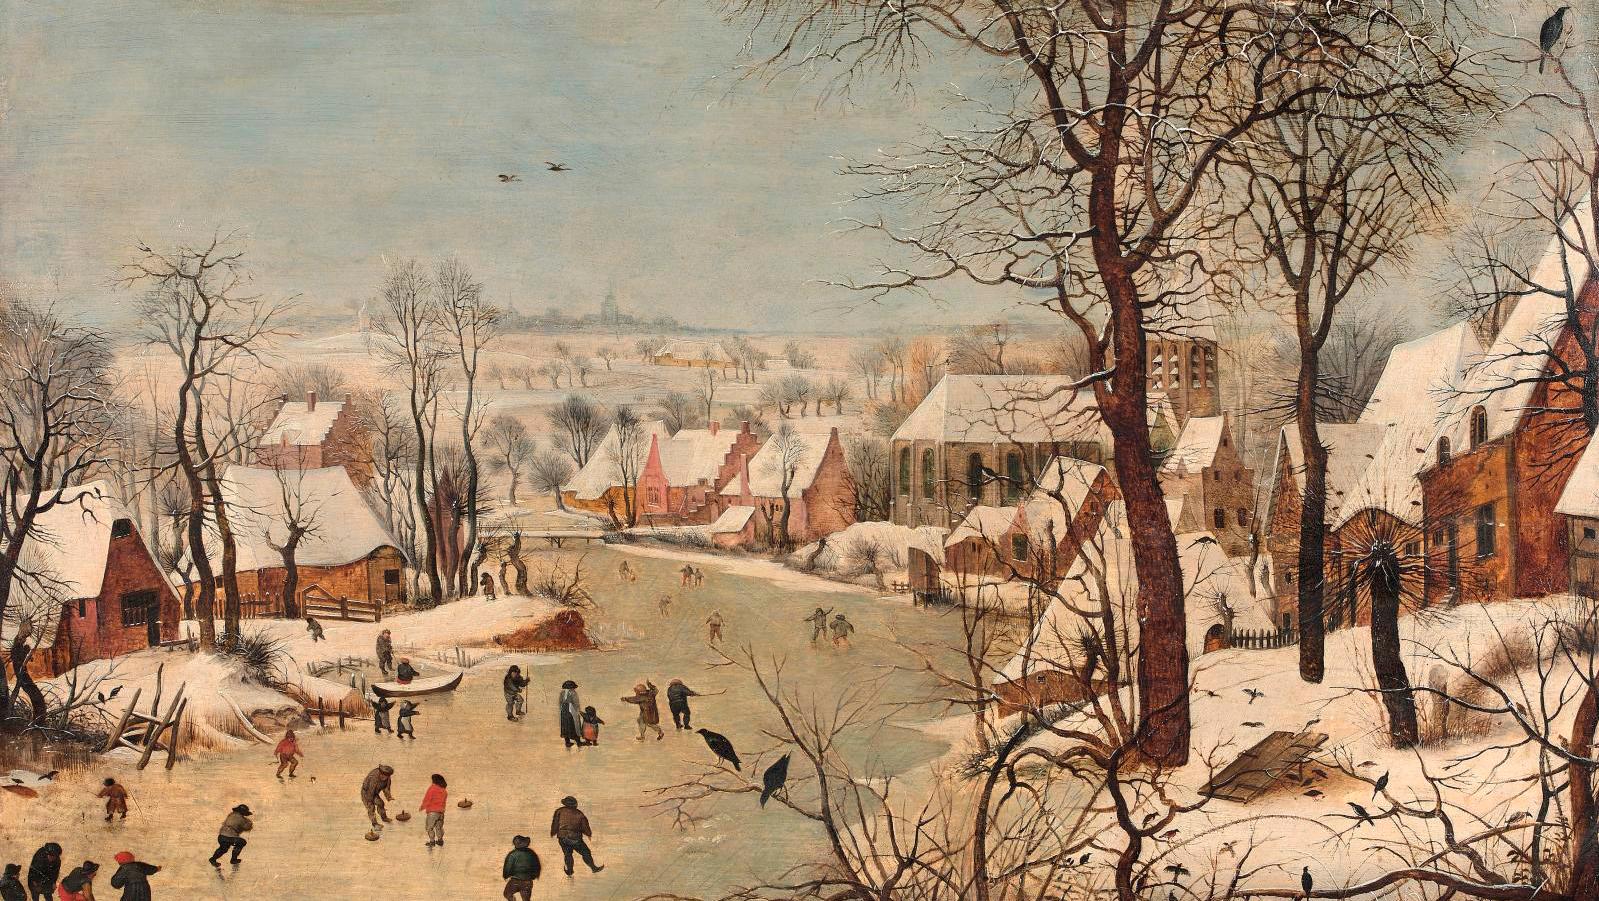 Pieter Brueghel the Younger (1564/1565-1636), Winter Landscape with Ice Skaters and... Winter’s Pleasures Through the Eyes of Pieter Bruegel the Younger